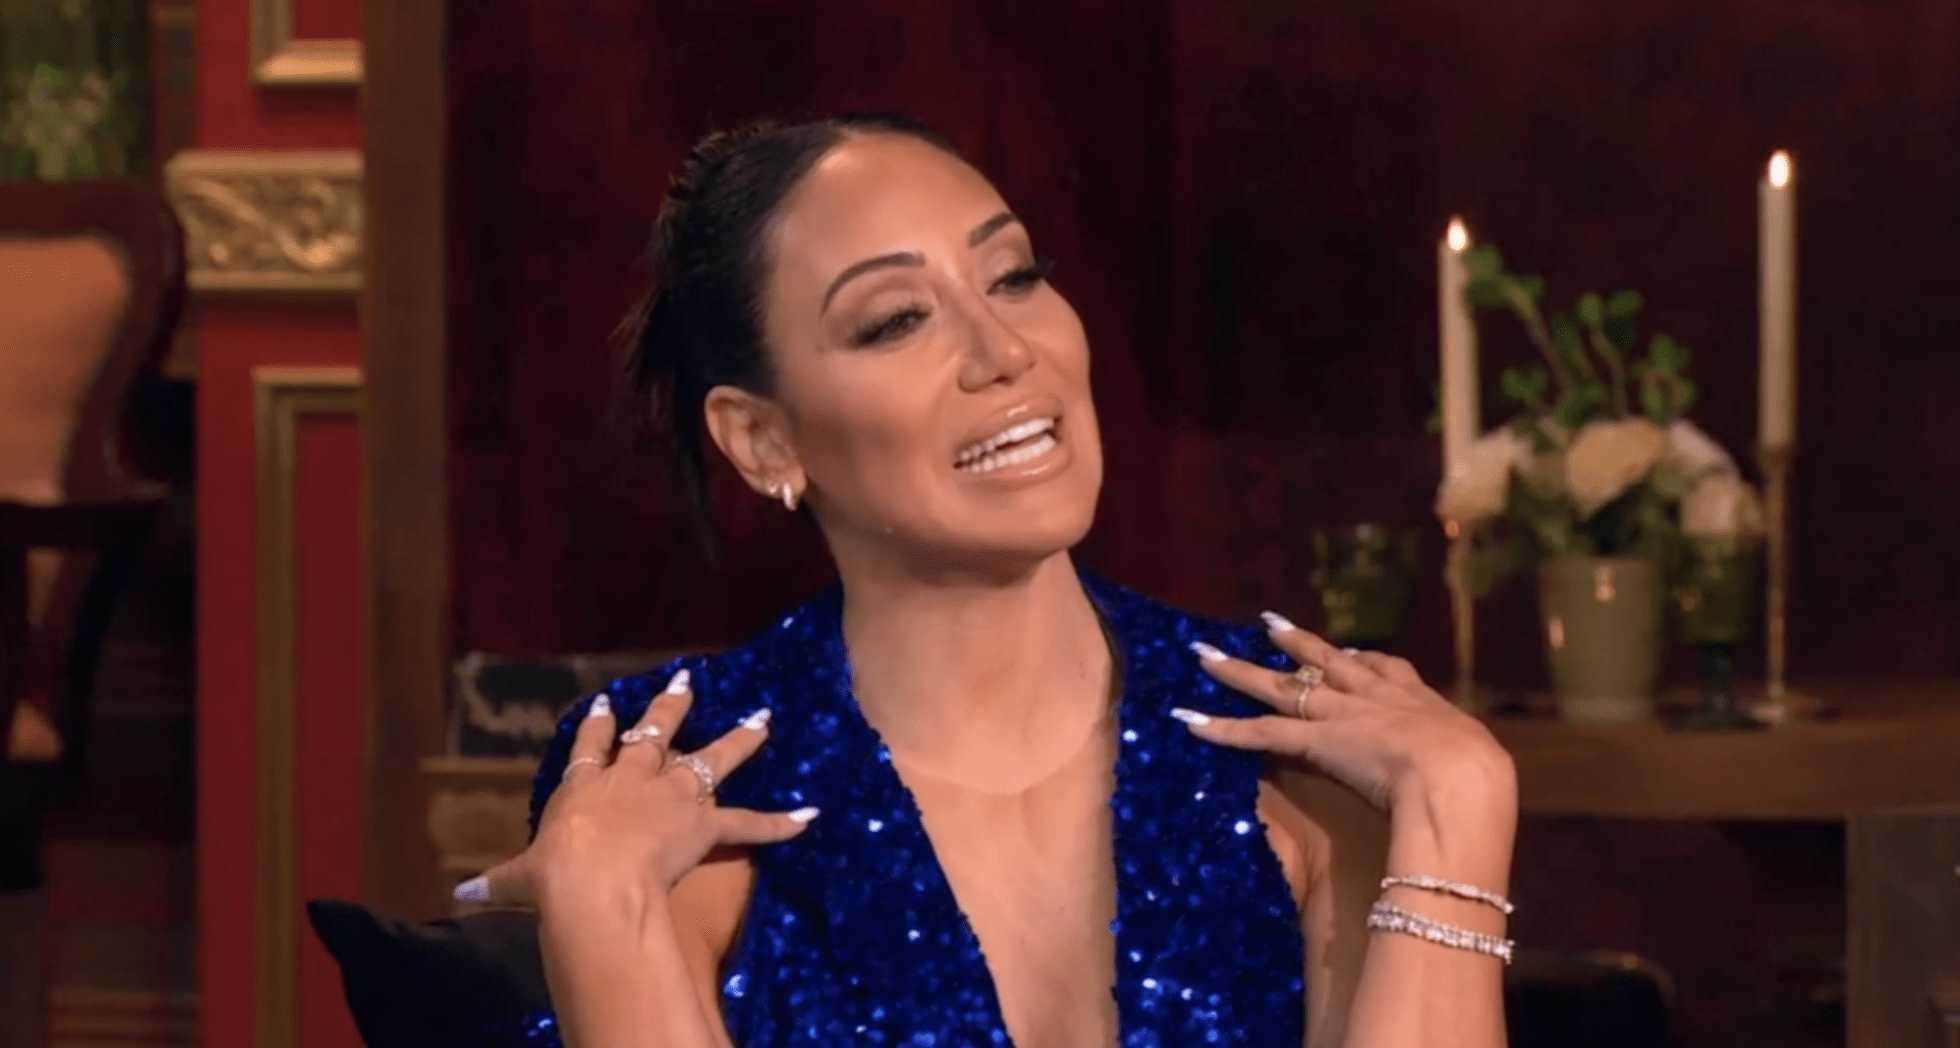 ‘RHONJ’ RECAP: Teresa Giudice Reveals Melissa Snitched To The FBI, Which Sent Her To Prison